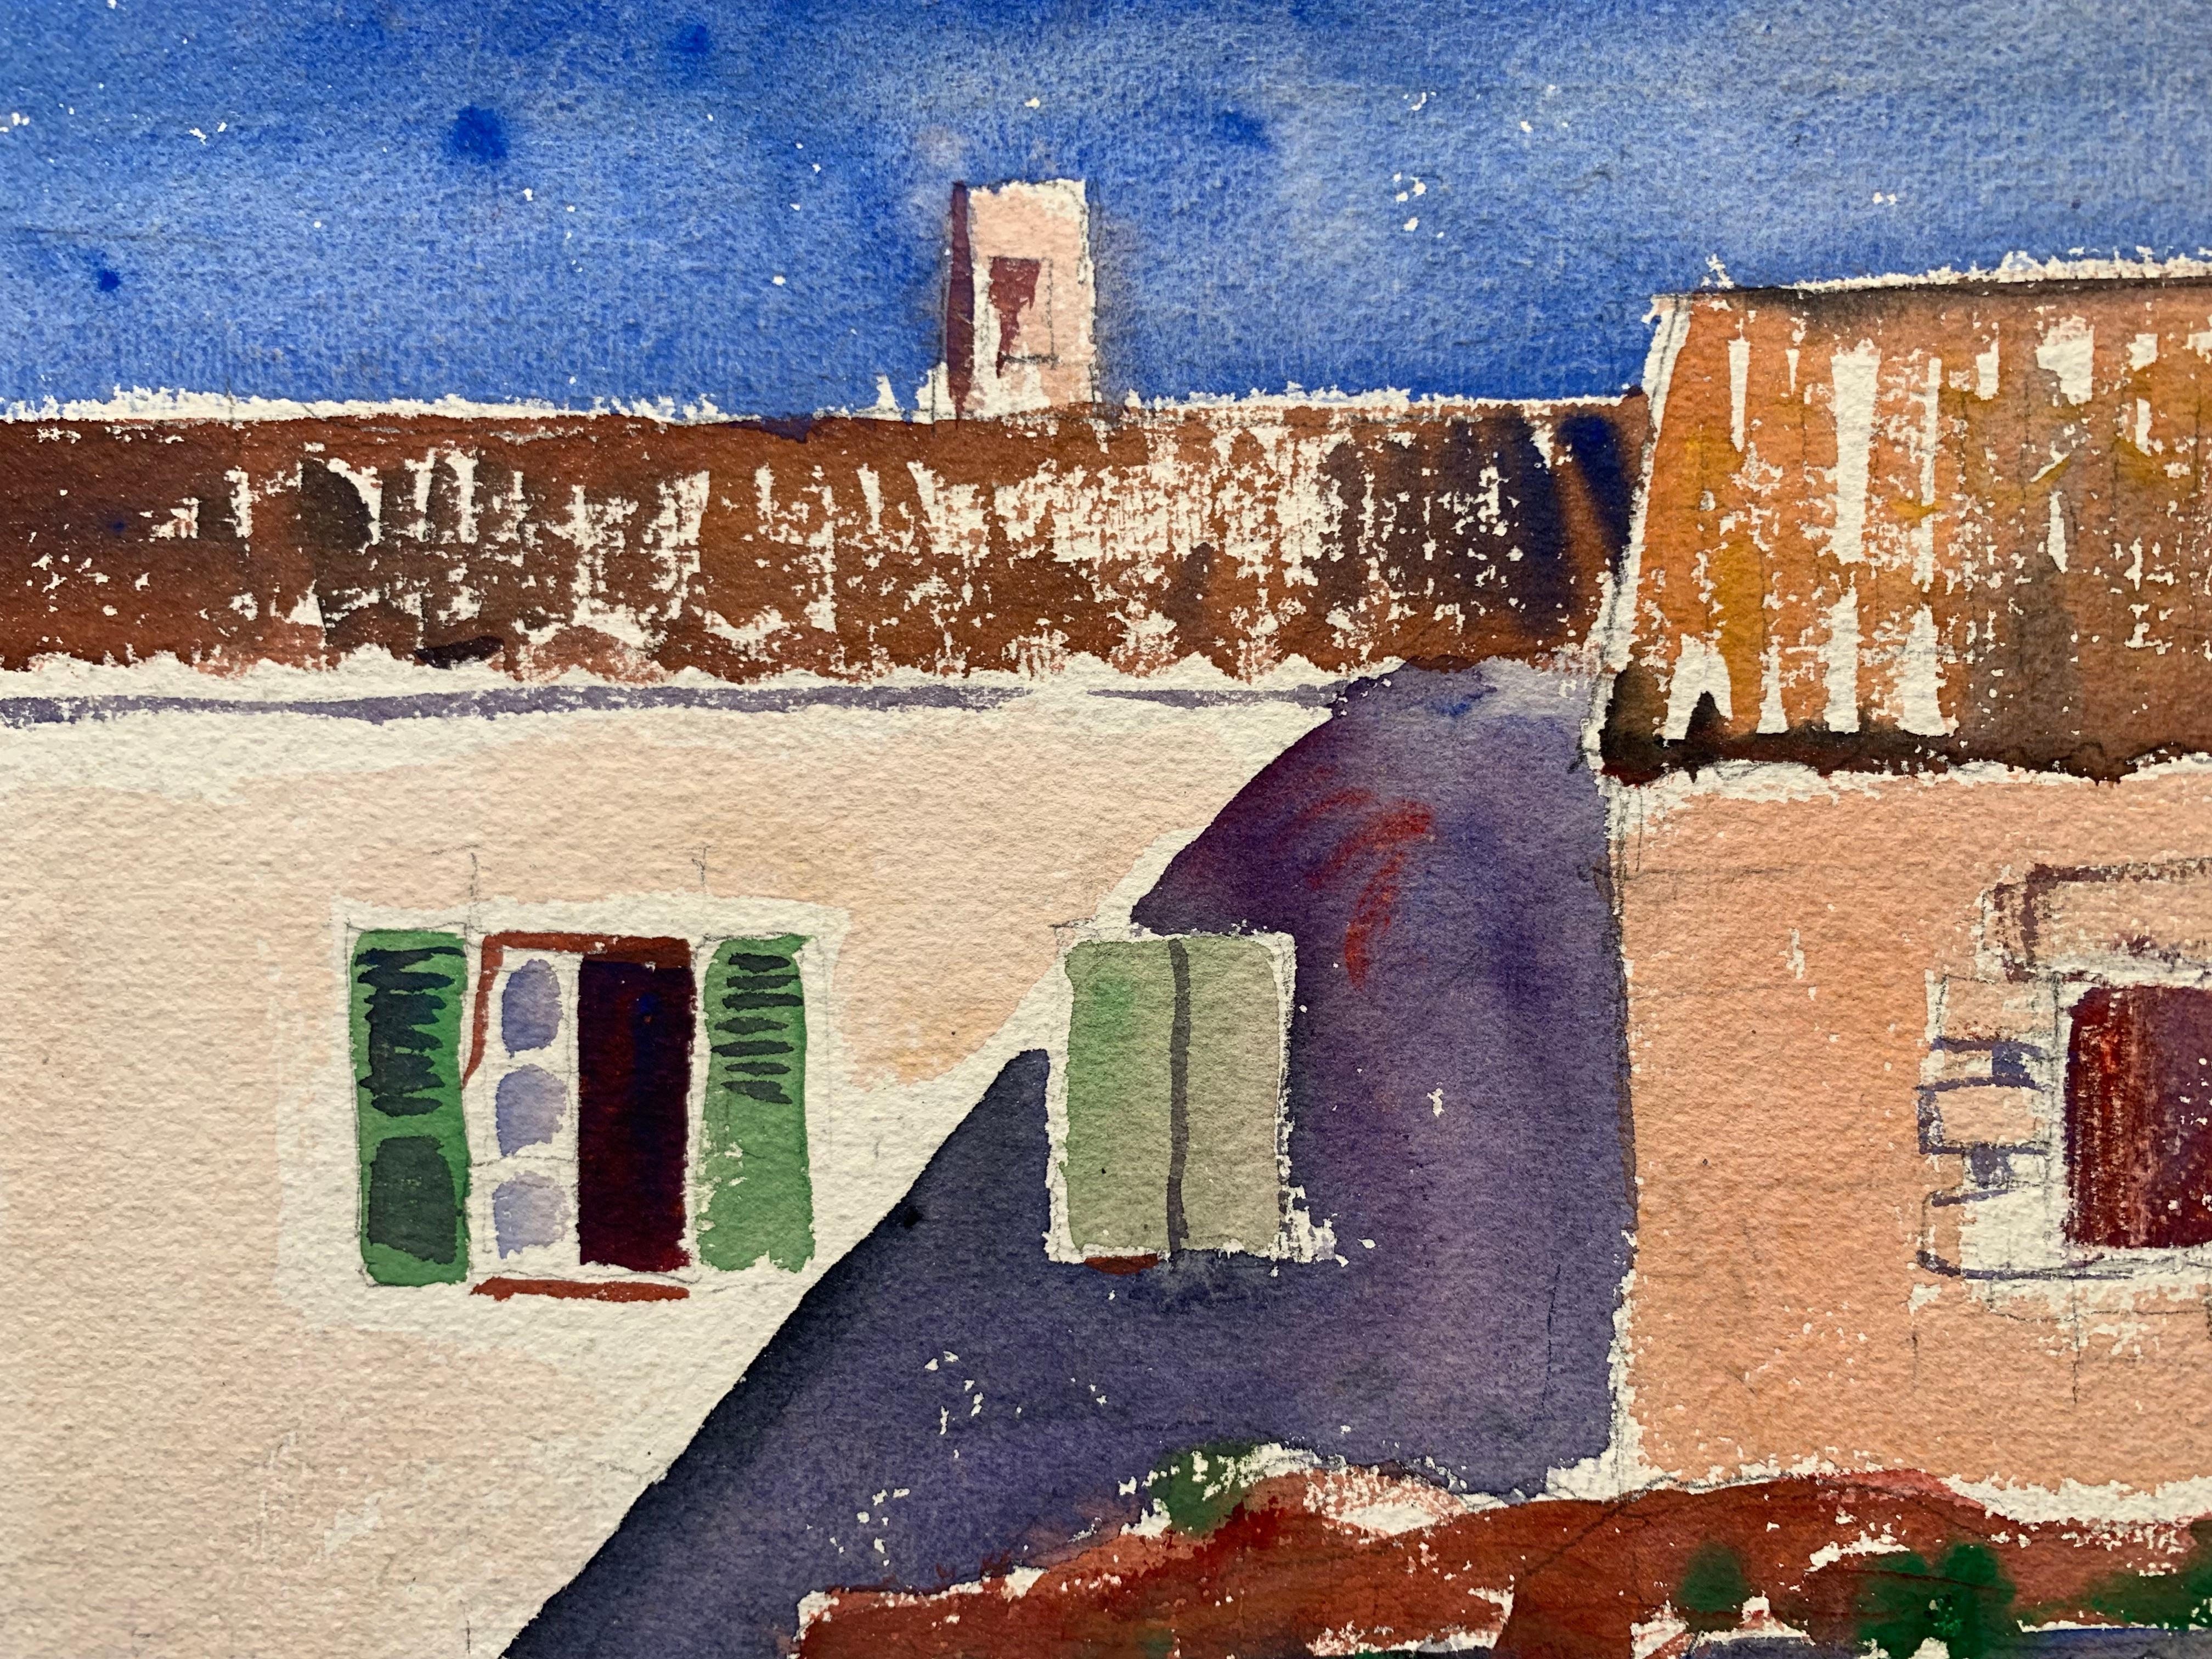 Beautiful abstract painting by American artist, James Floyd Clymer (1893-1982). Puerto en Mallorca, ca.1930. Watercolor and pencil on paper measures 15.5 x 20.5 inches. Signed lower margin. 

James Floyd Clymer ( 1893-1982 ) known for his